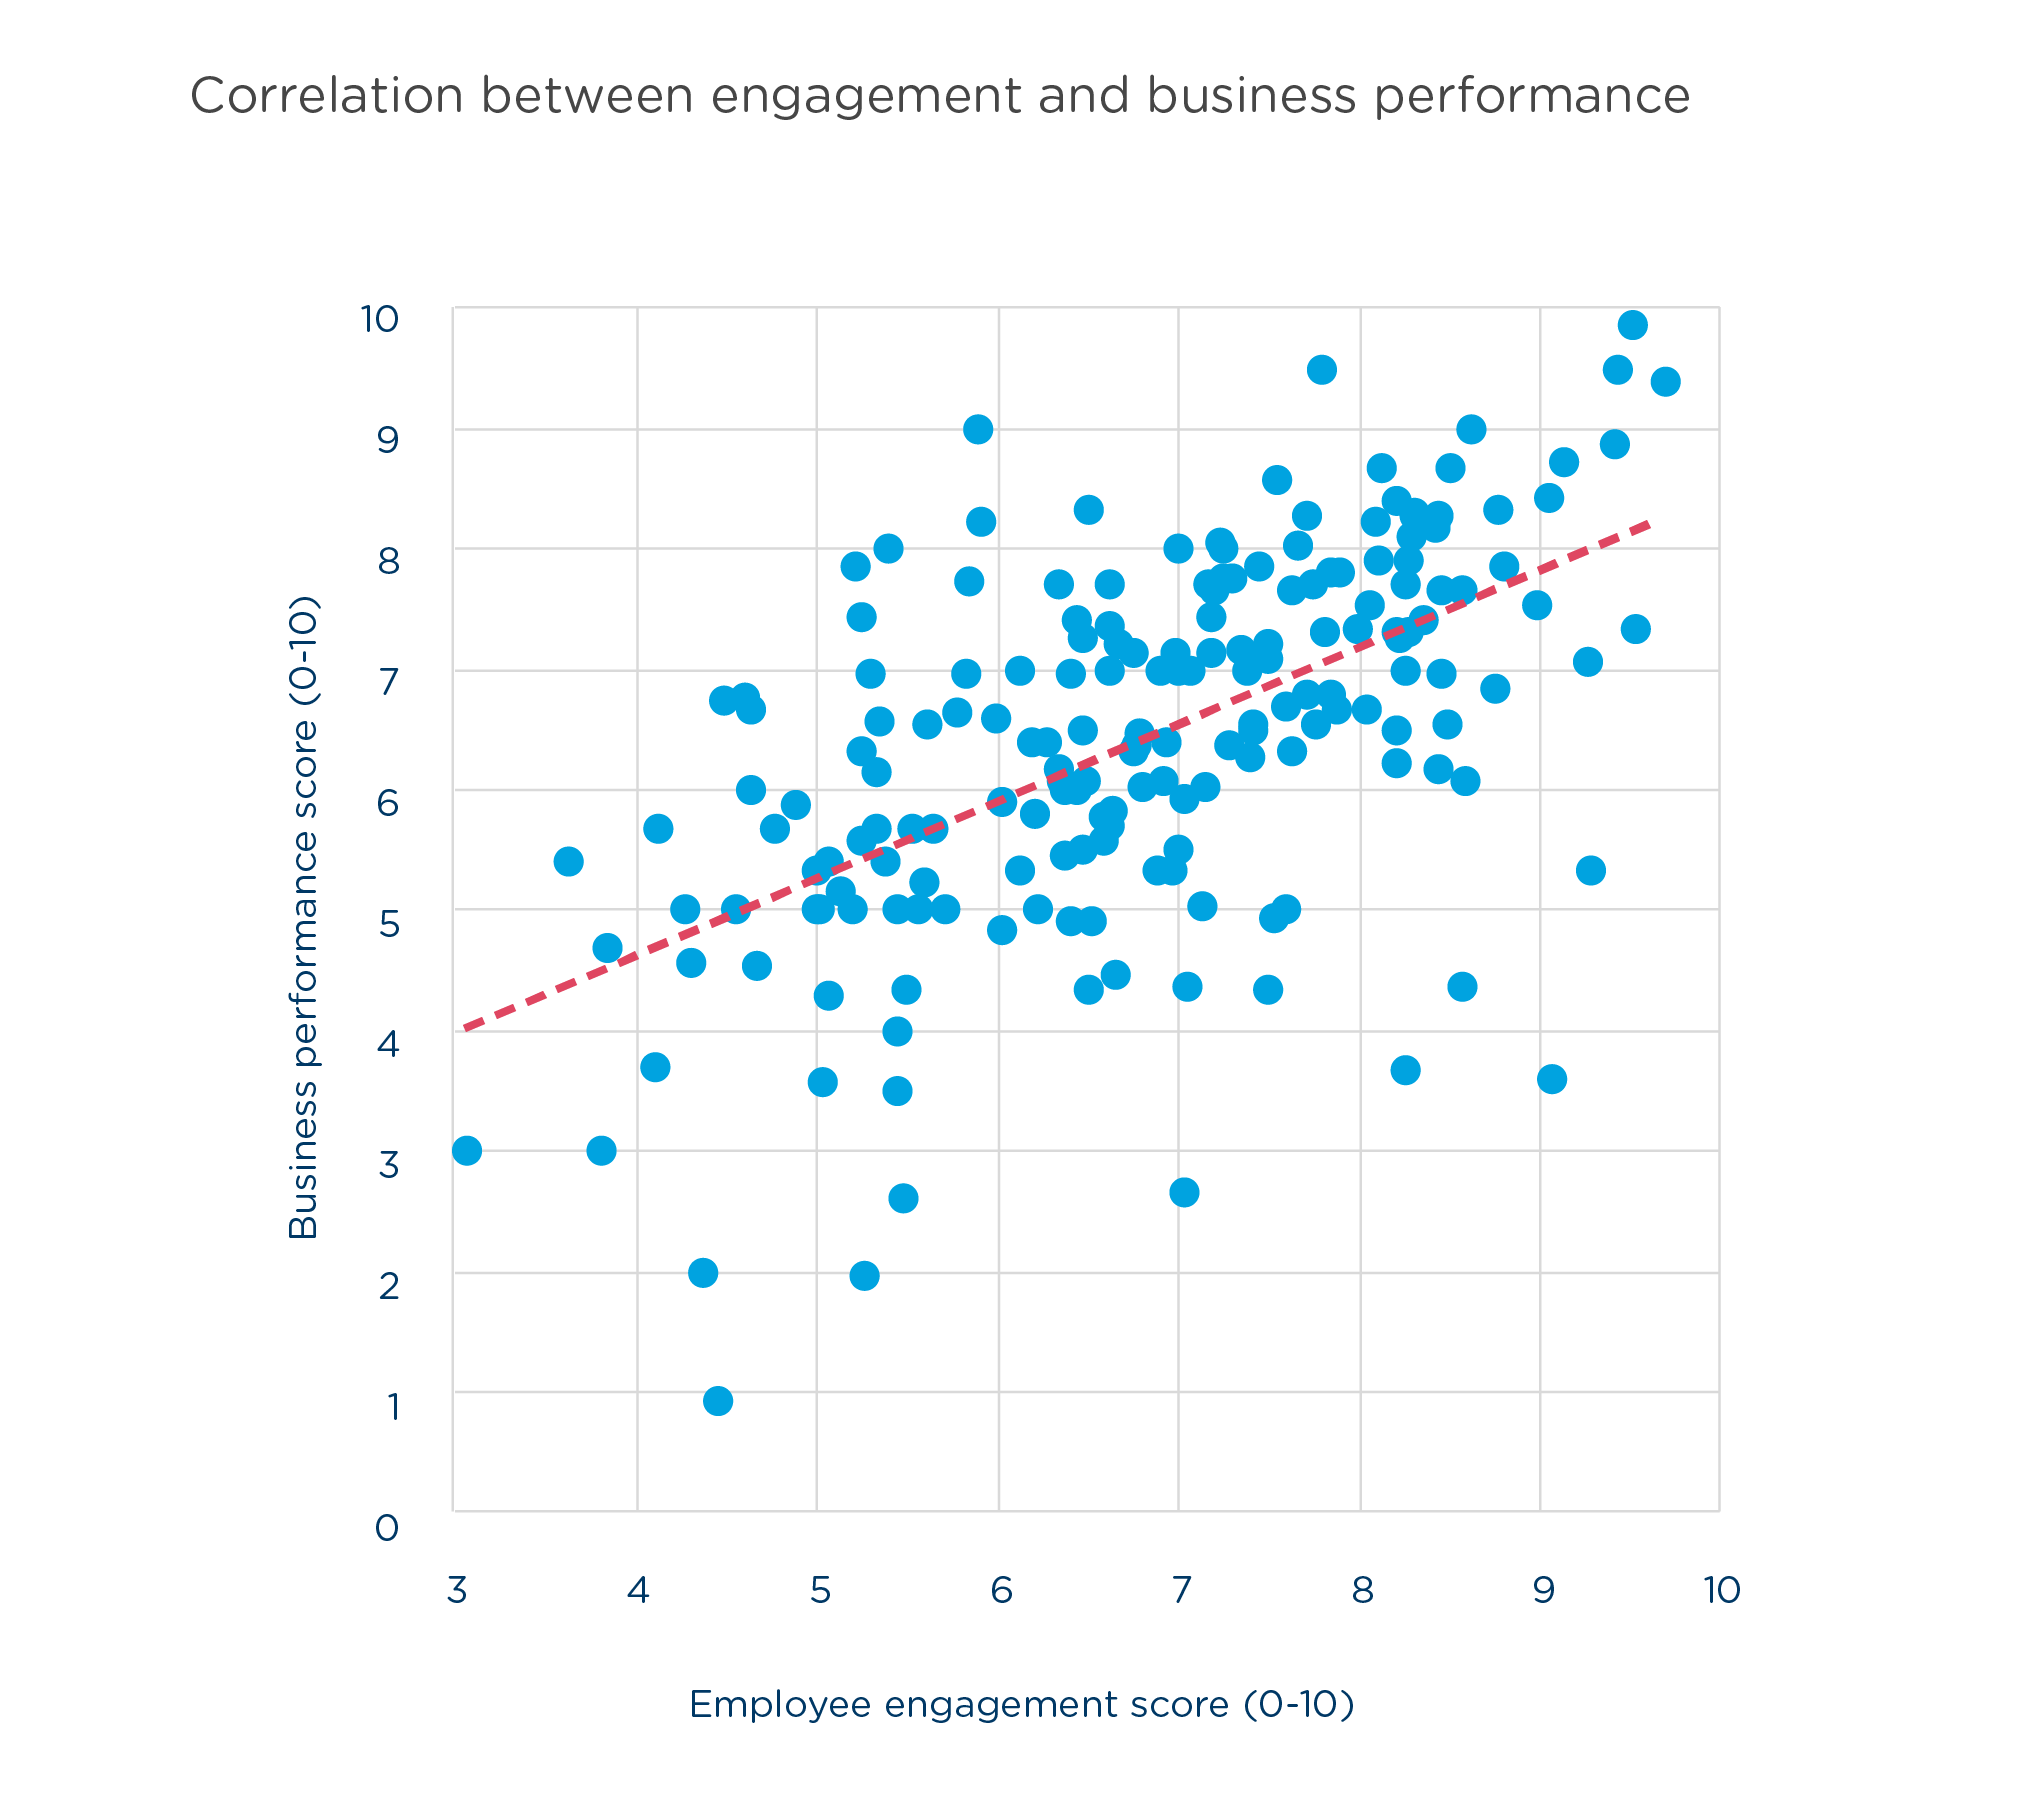 1. Correlation between engagement and business performance